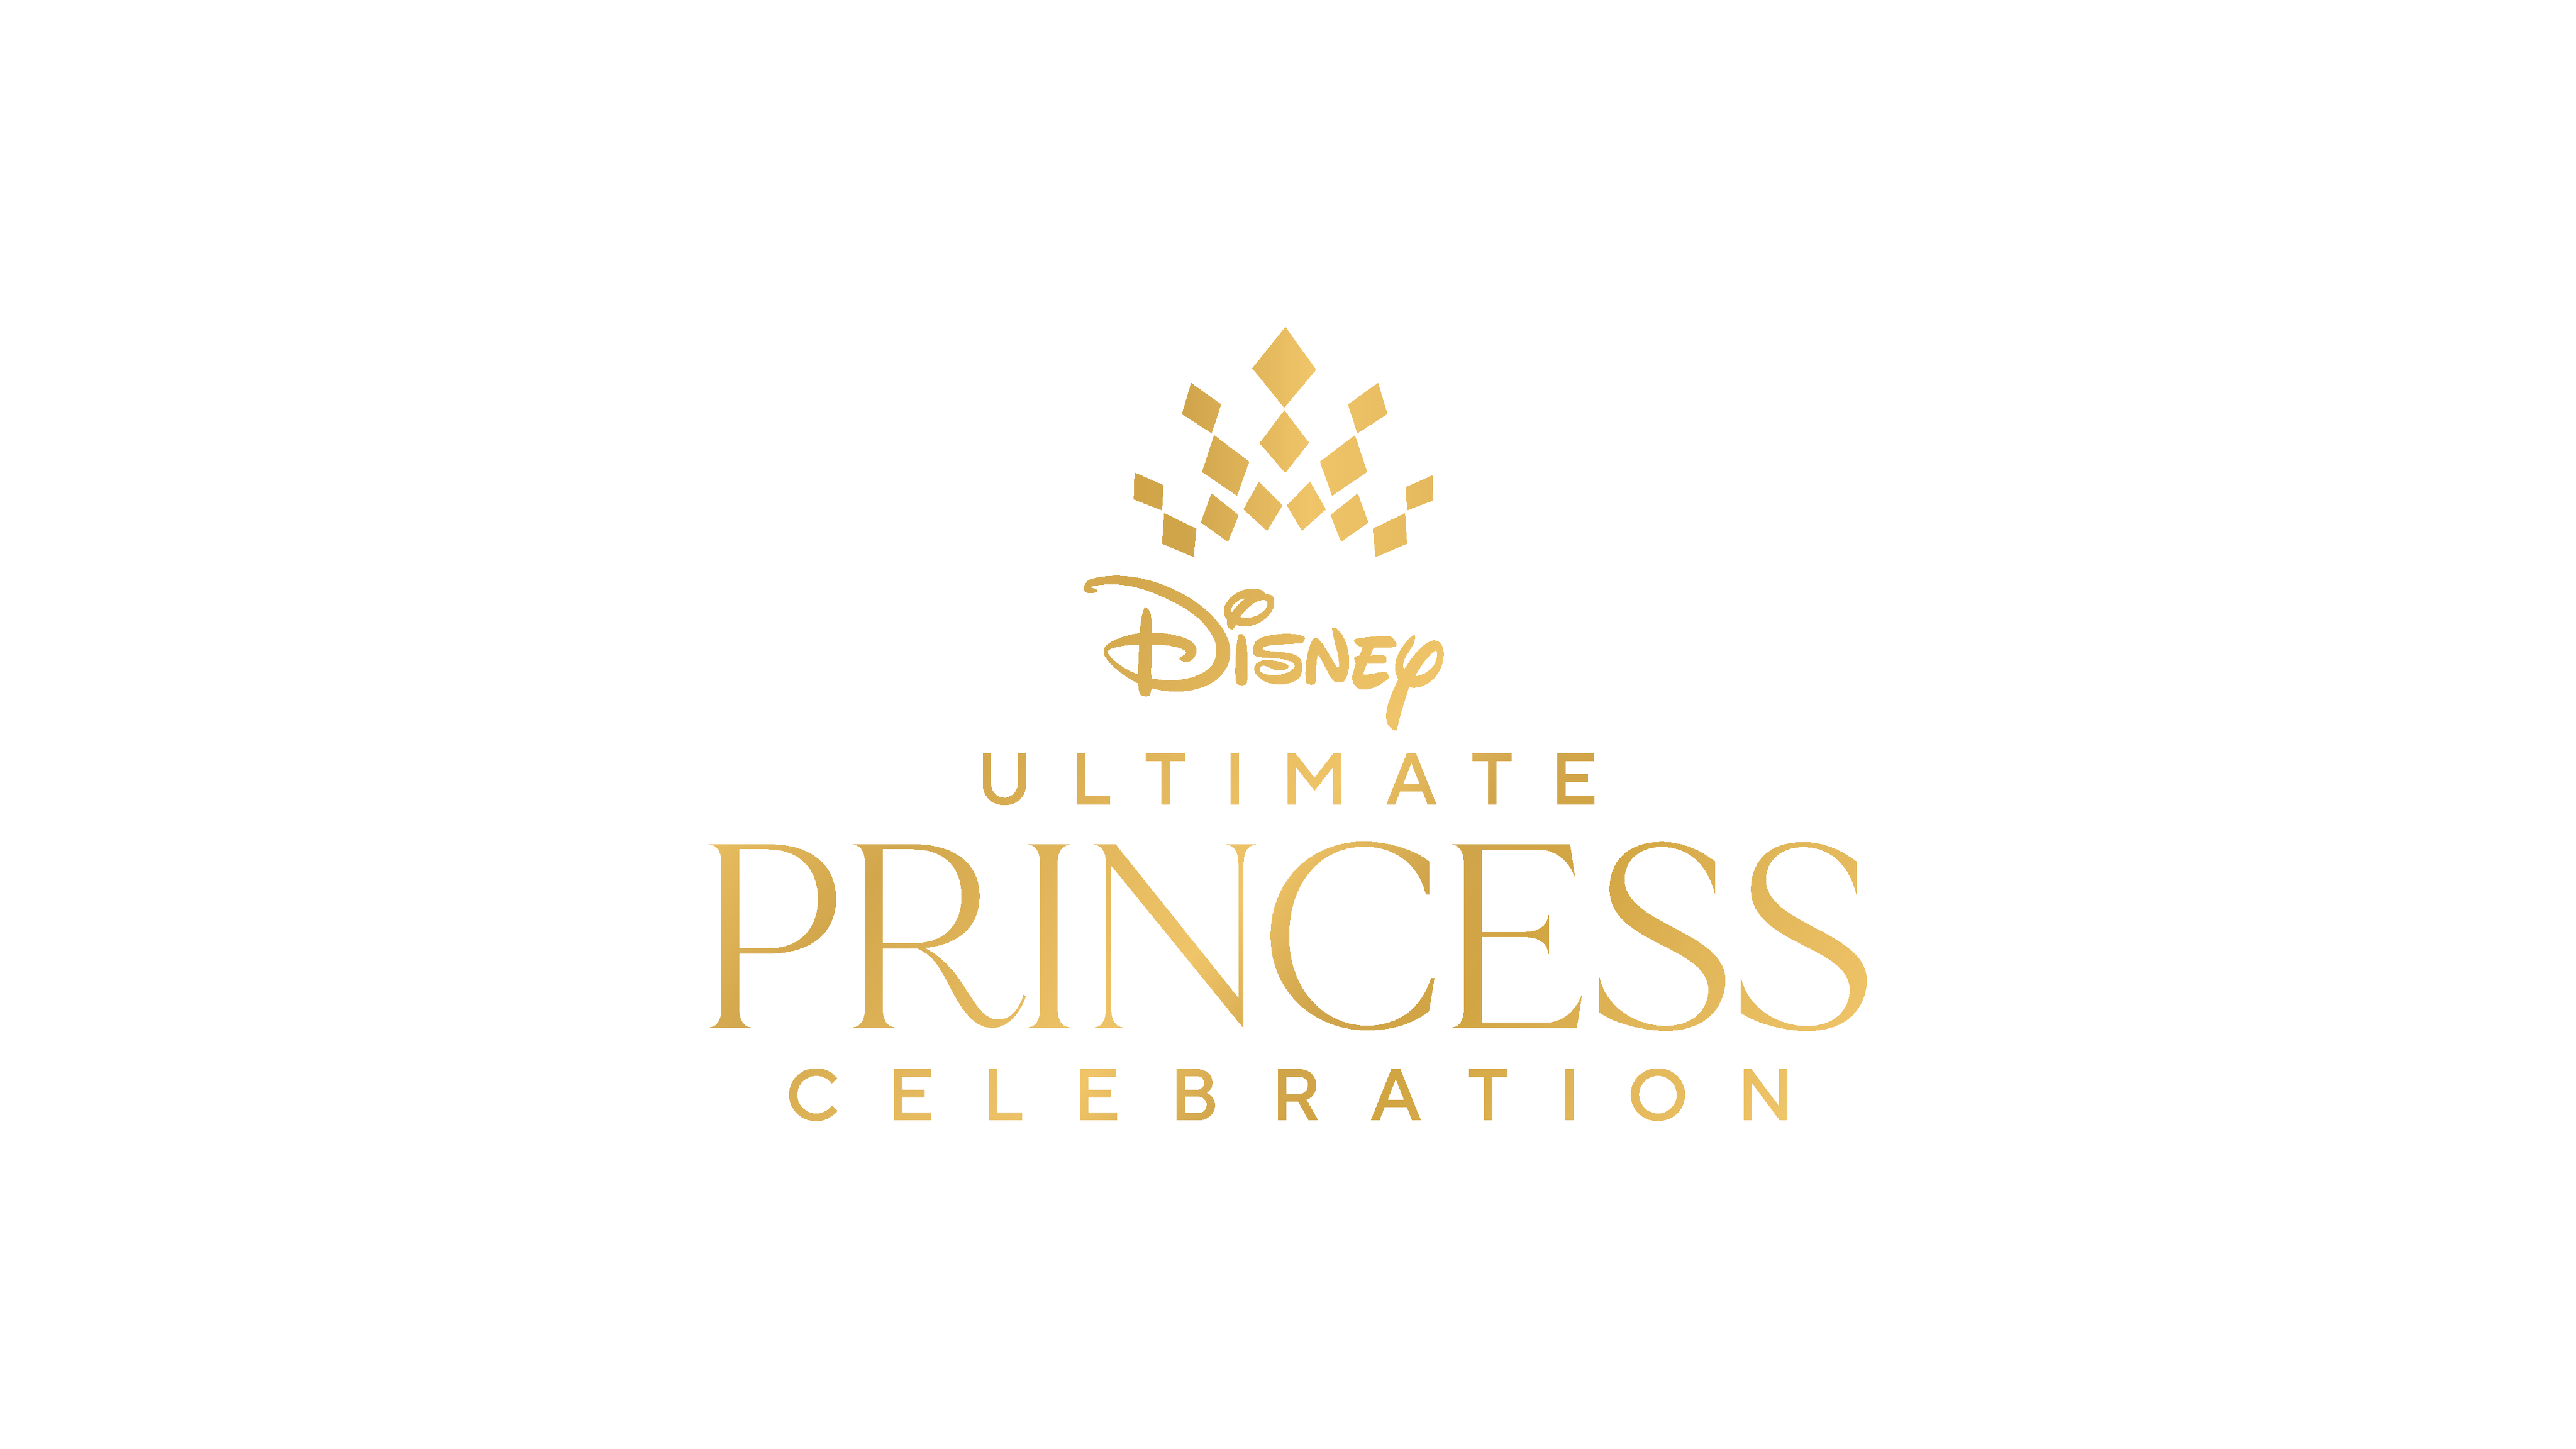 Disney launches multi-language music video for Ultimate Princess Celebration anthem Starting Now, featuring 15 fabulous artists from across the globe